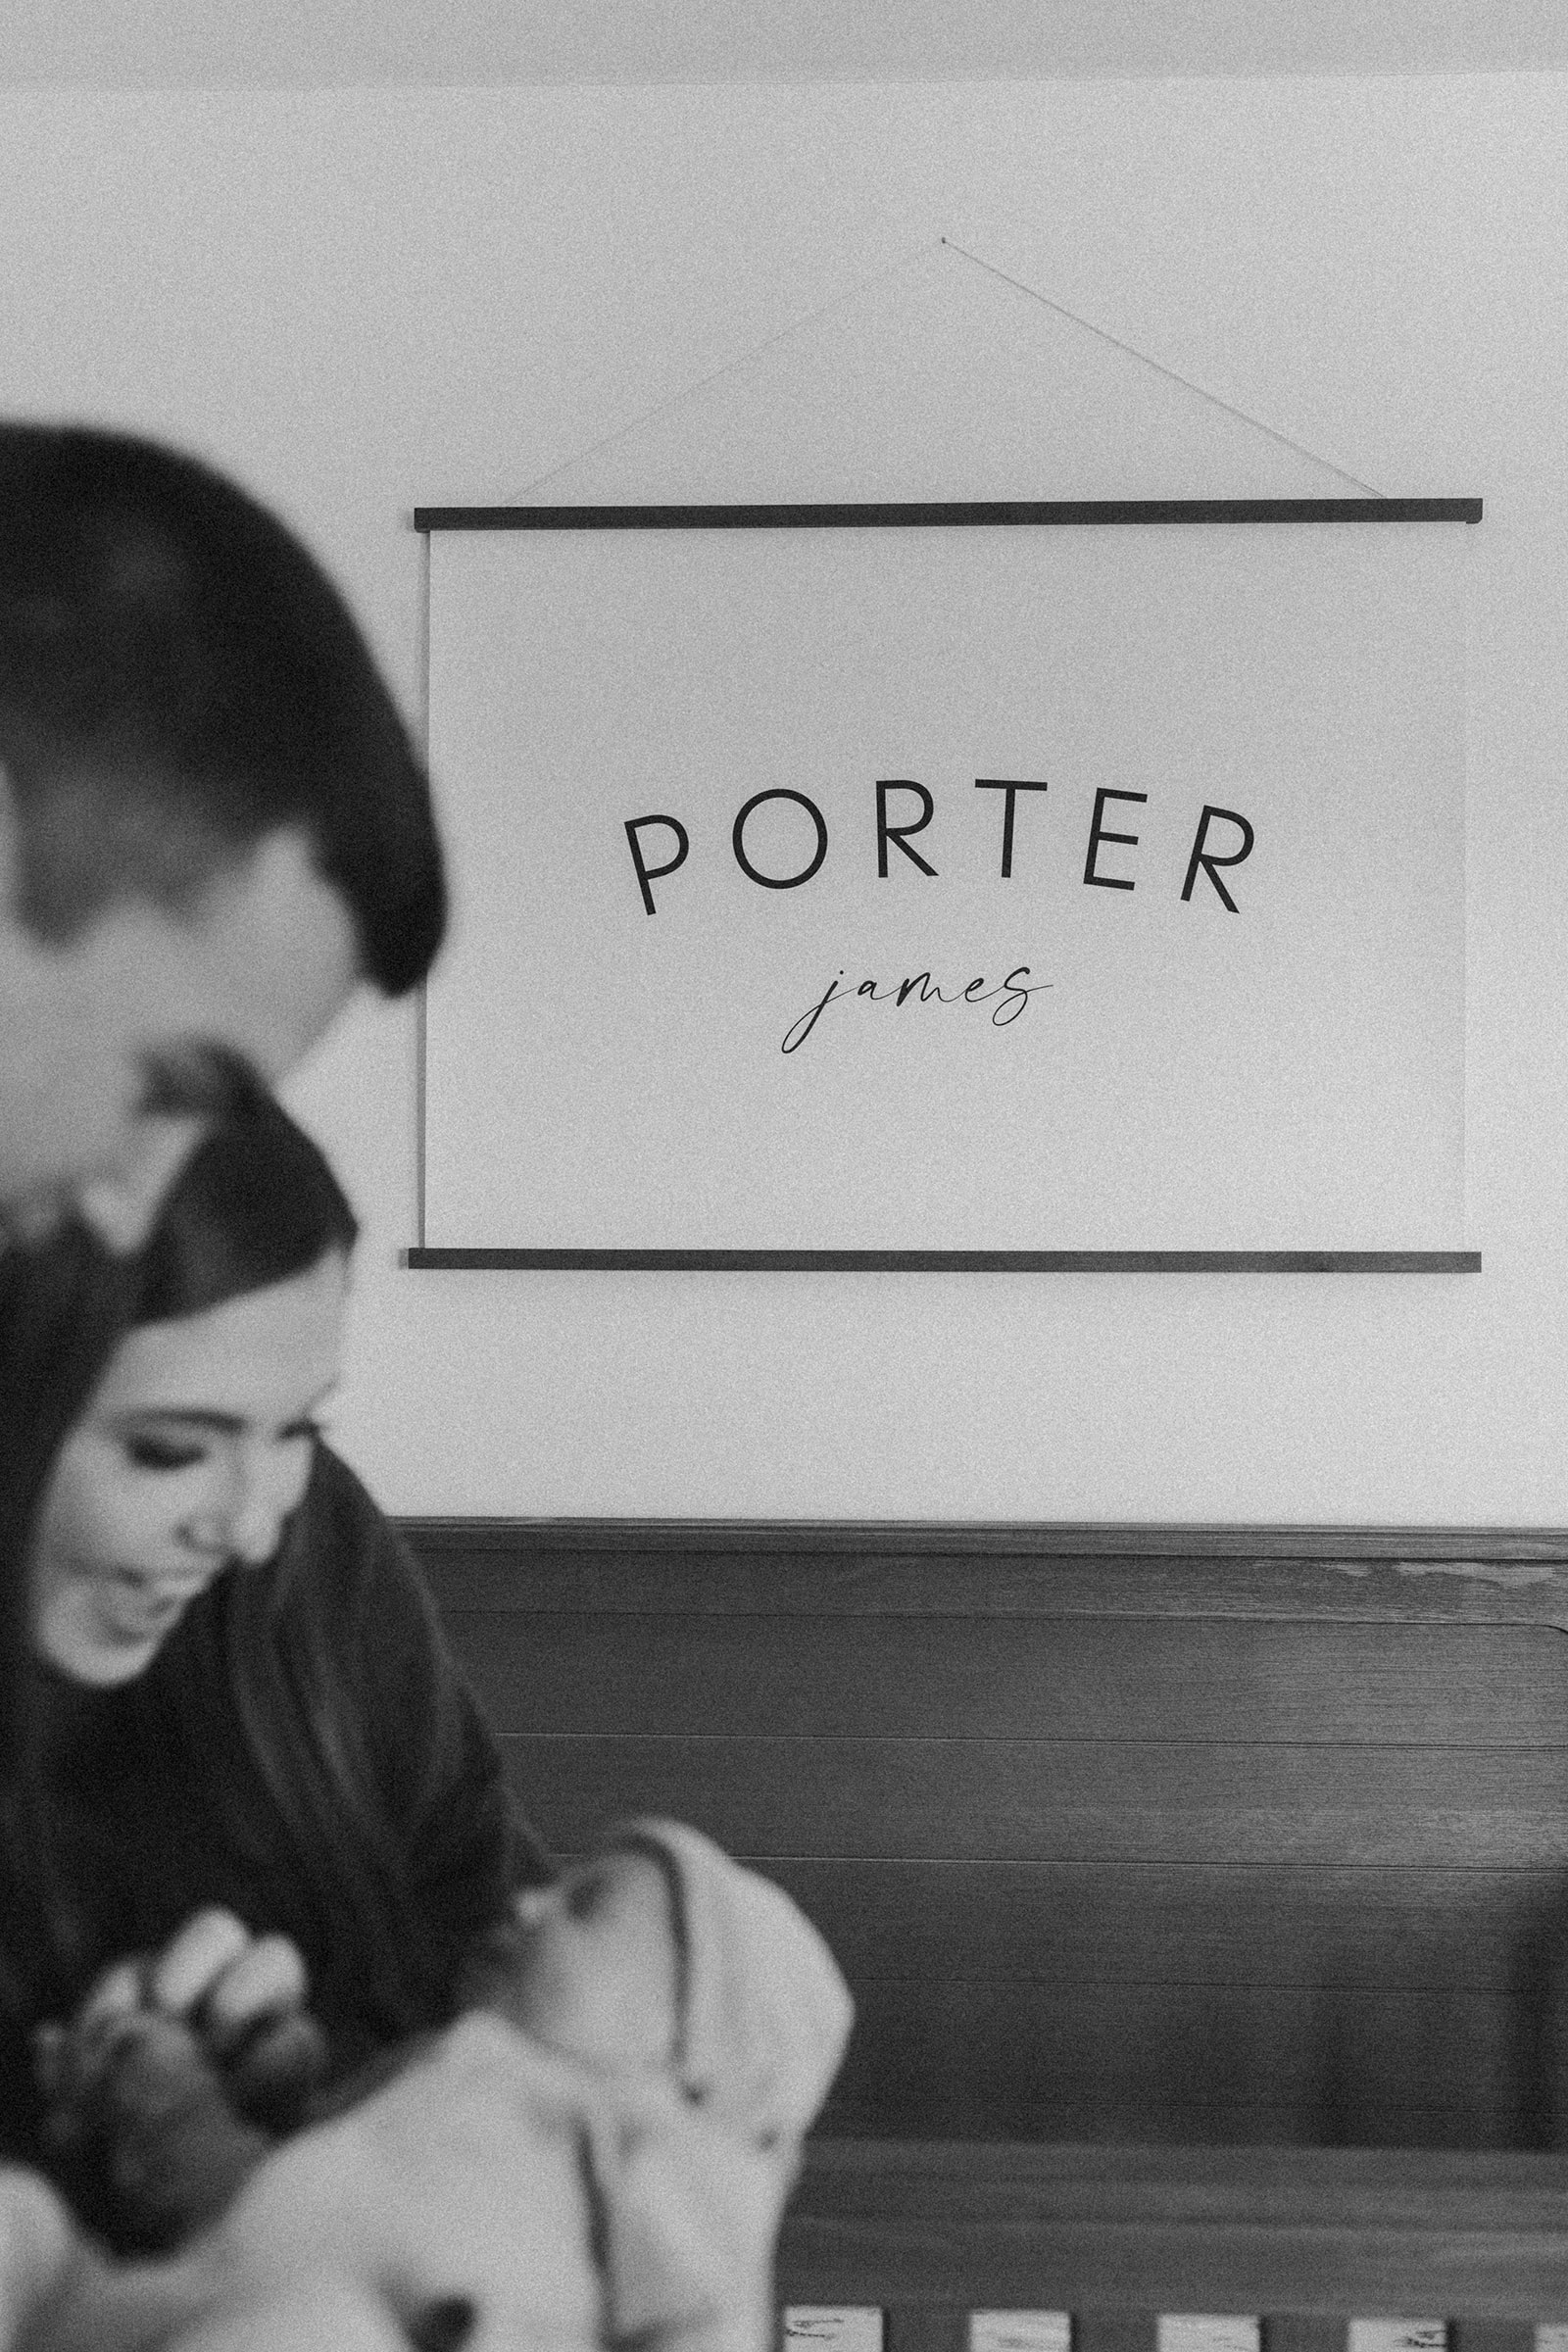 couple holding baby in nursery with name sign in background during in-home newborn family photo session. 